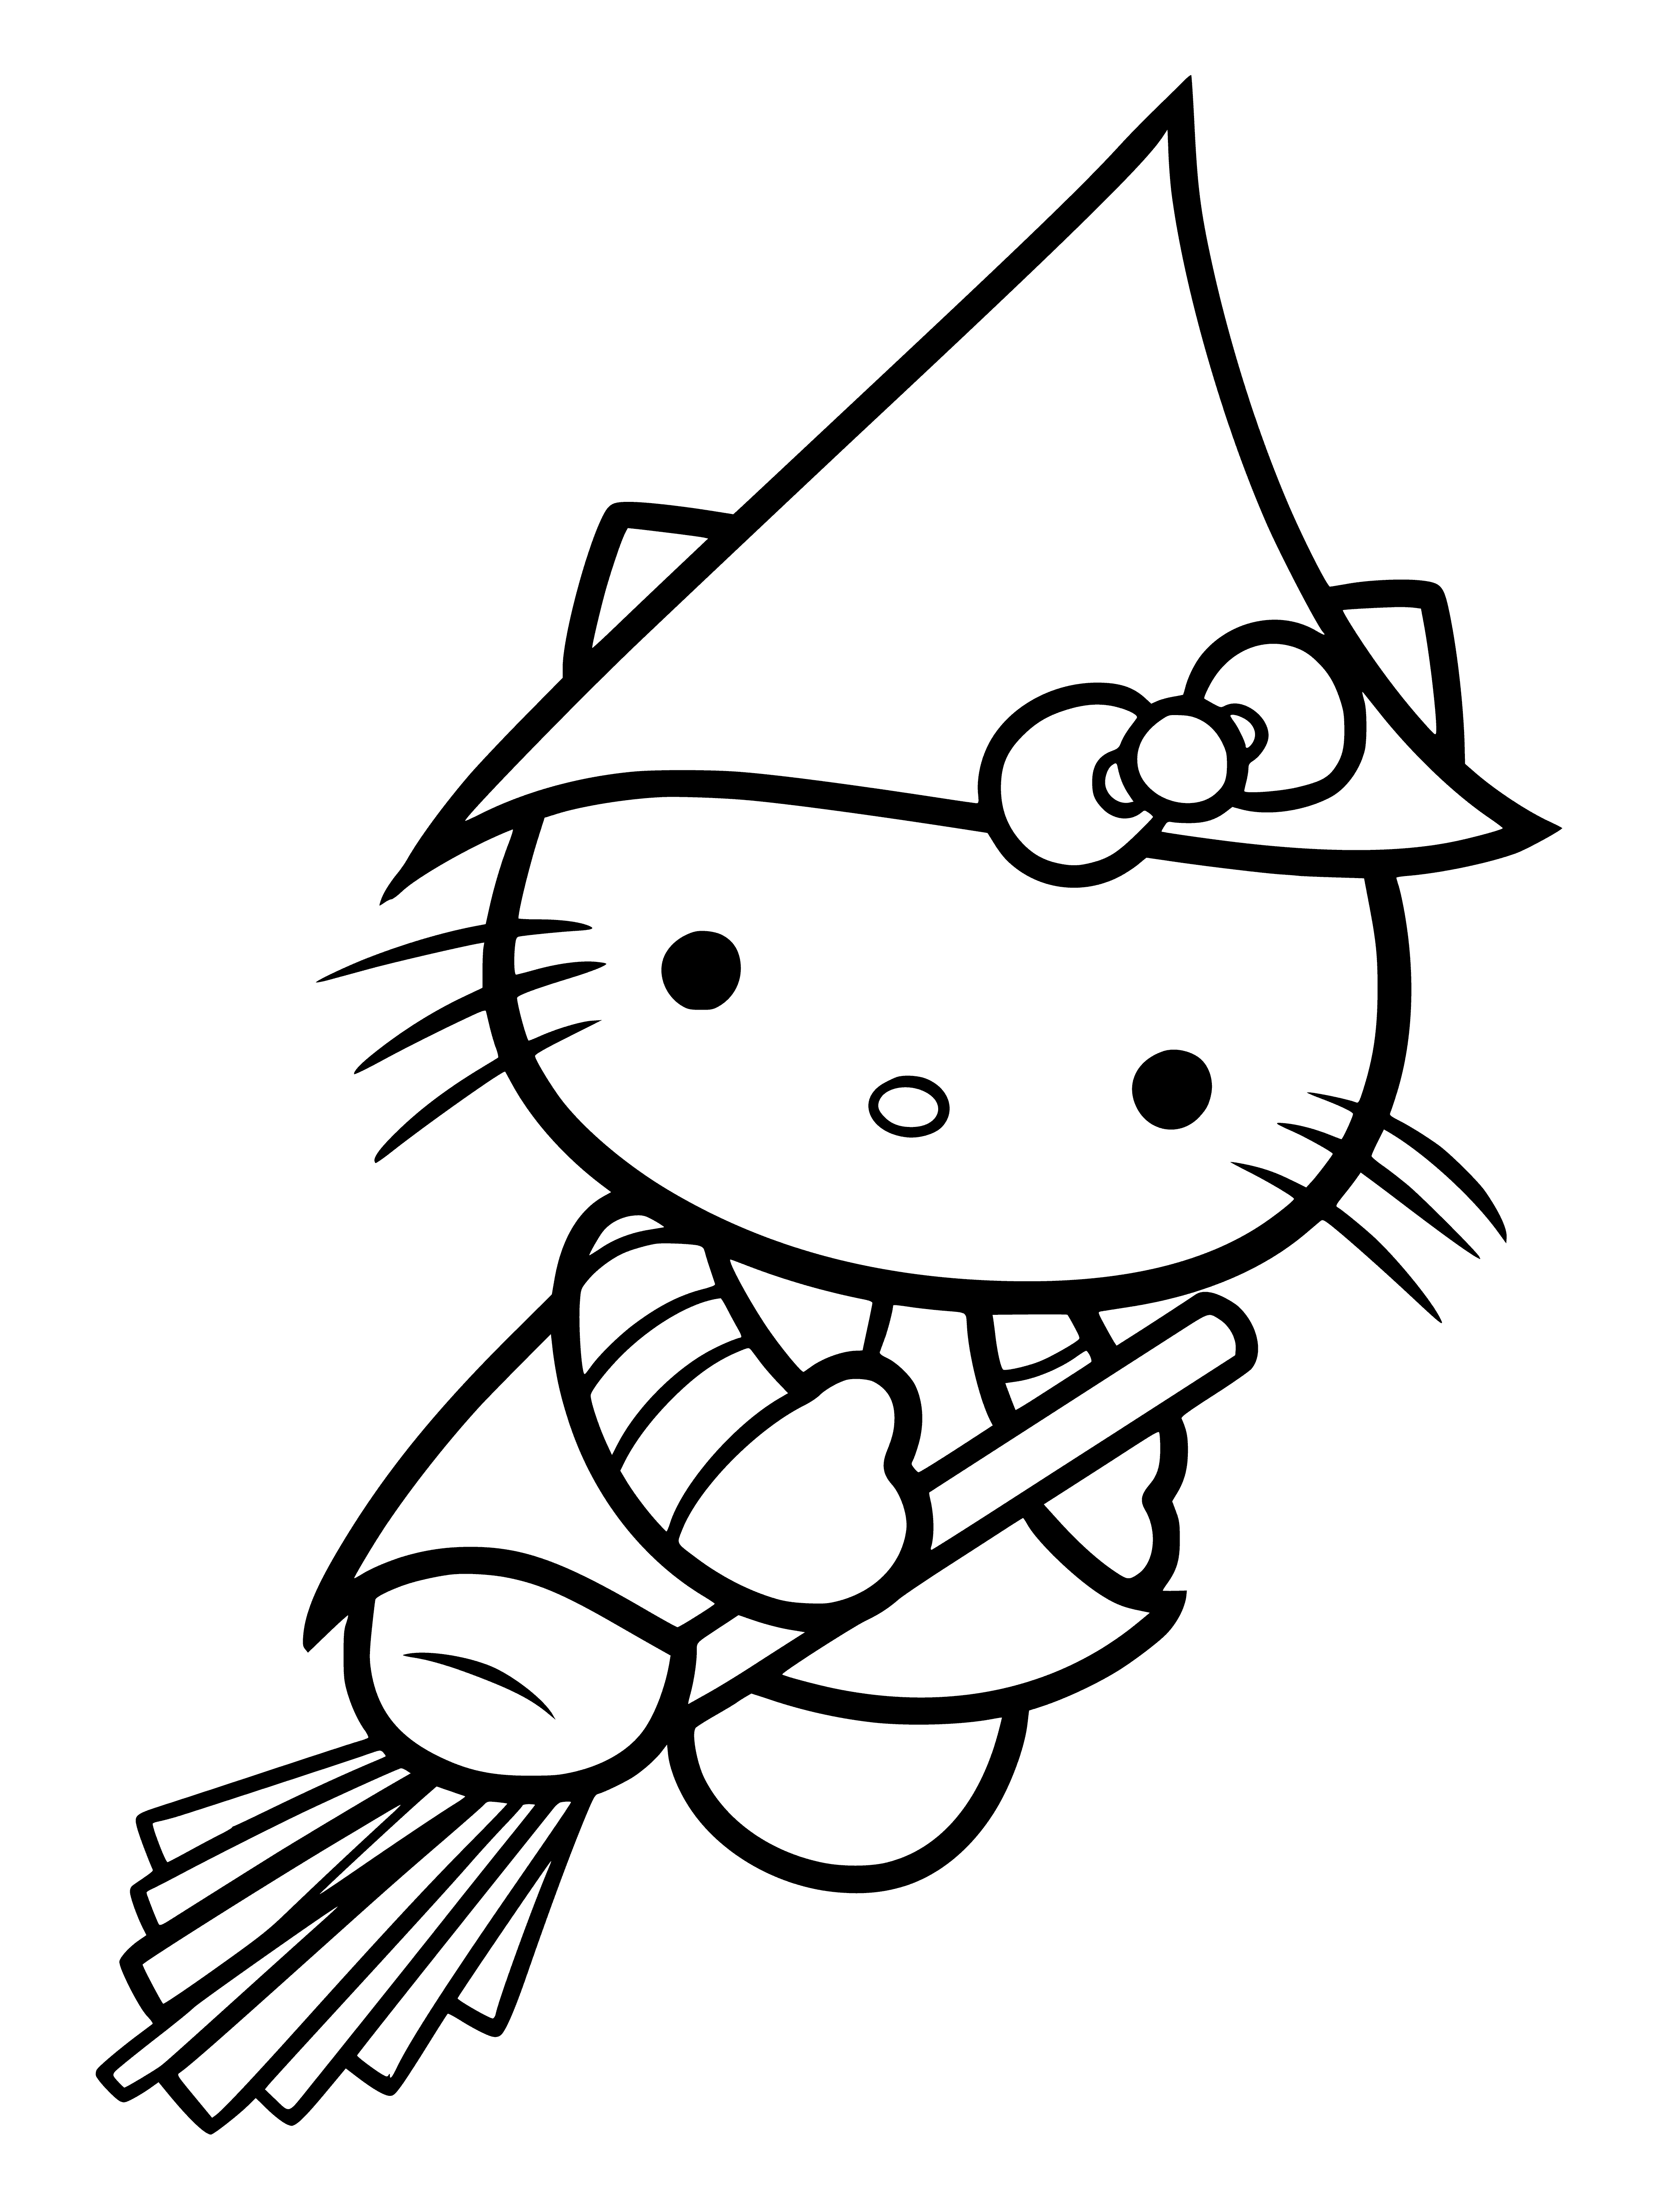 coloring page: Black cat on Jack-o-Lantern, wearing purple bow, green eyes. Orange & black witch hat in background. #Halloween #ColoringPage